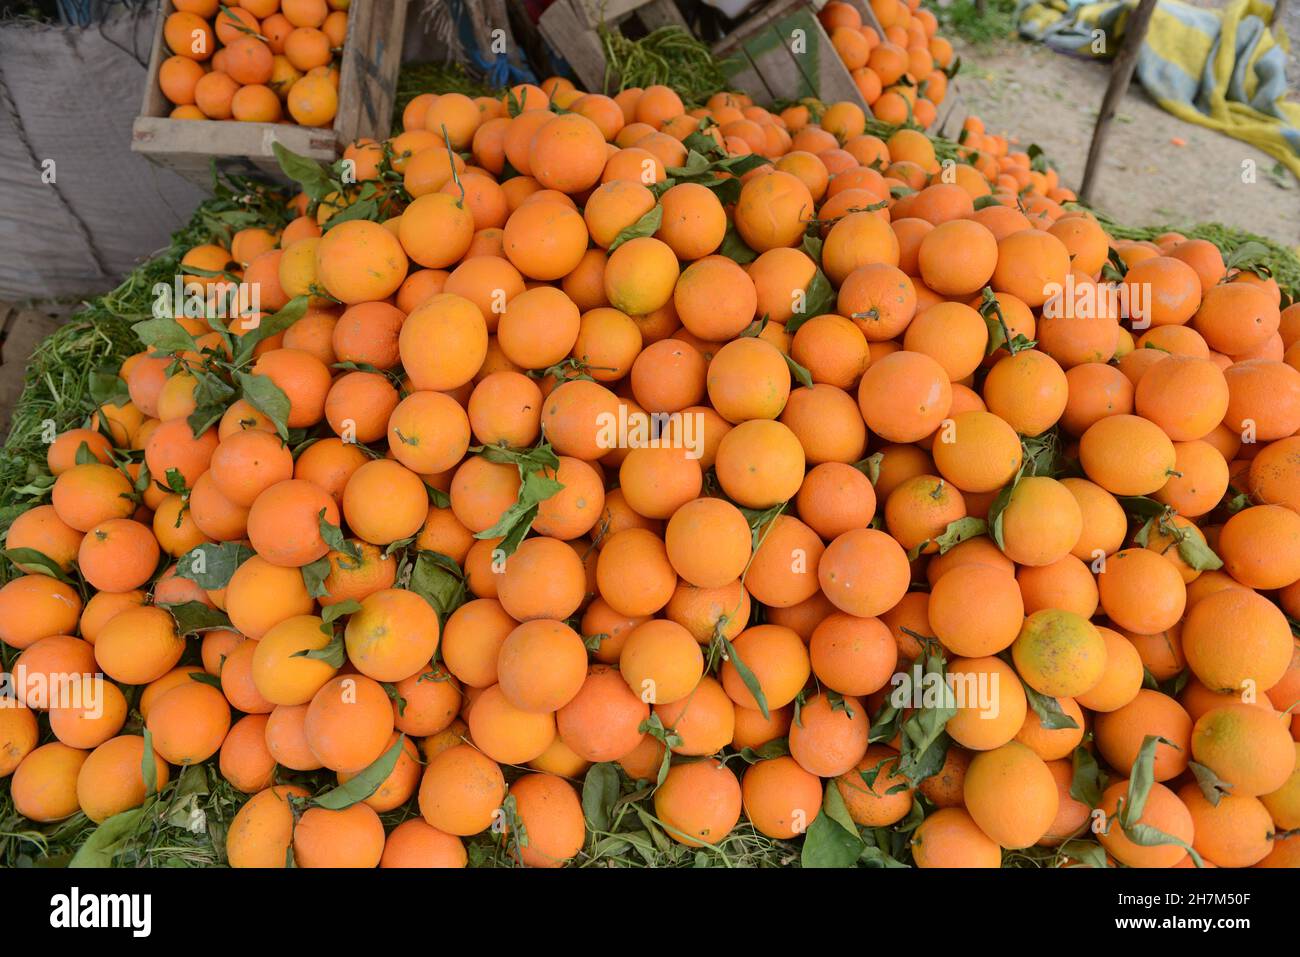 A pile of Moroccan oranges. Stock Photo